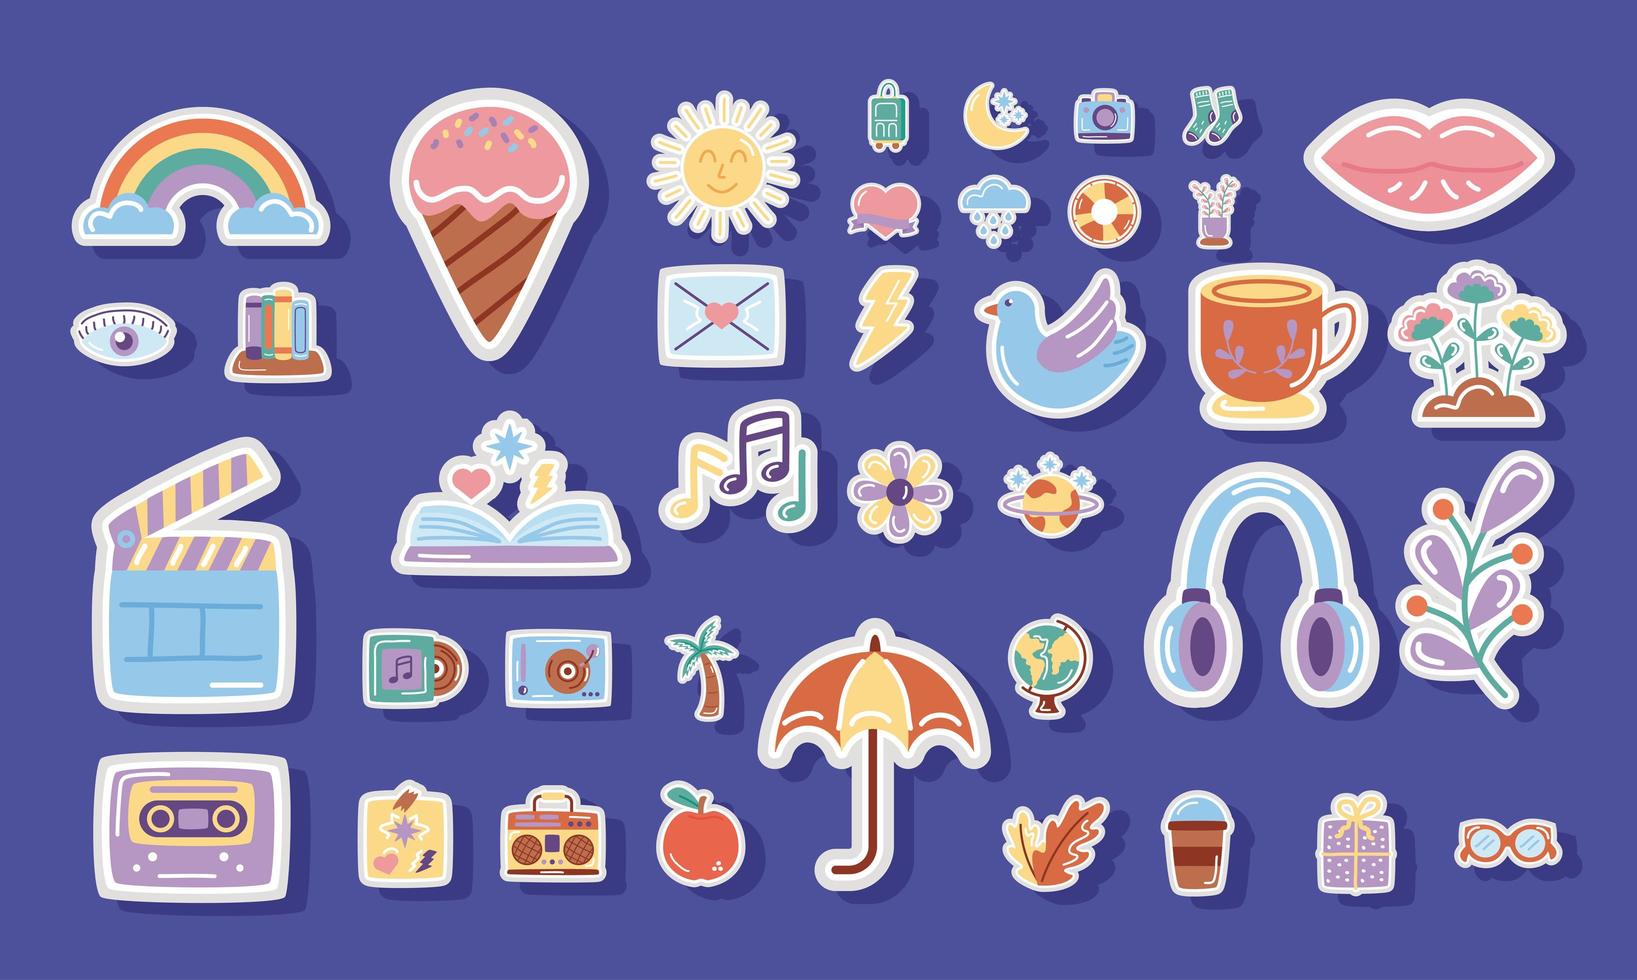 bundle of stickers icons in blue background vector